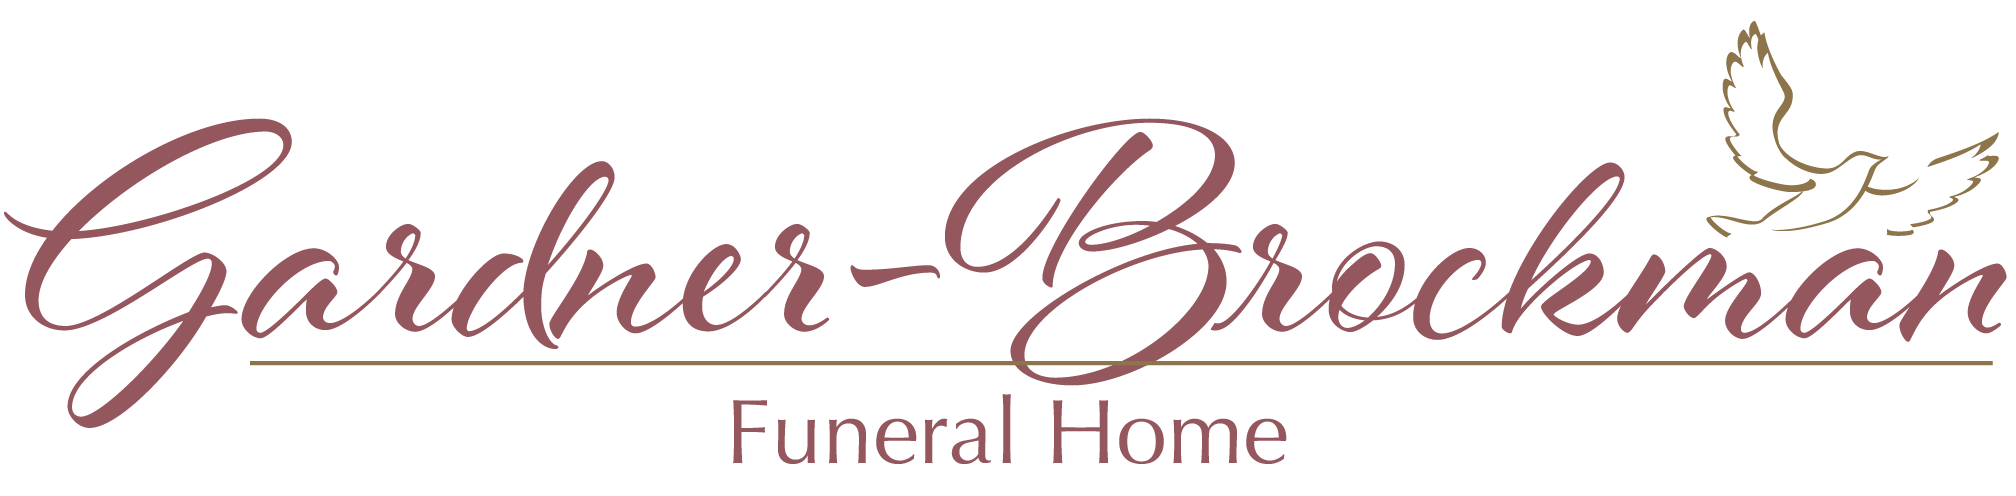 Funeral Home Logo - Goodwin Funeral Home |